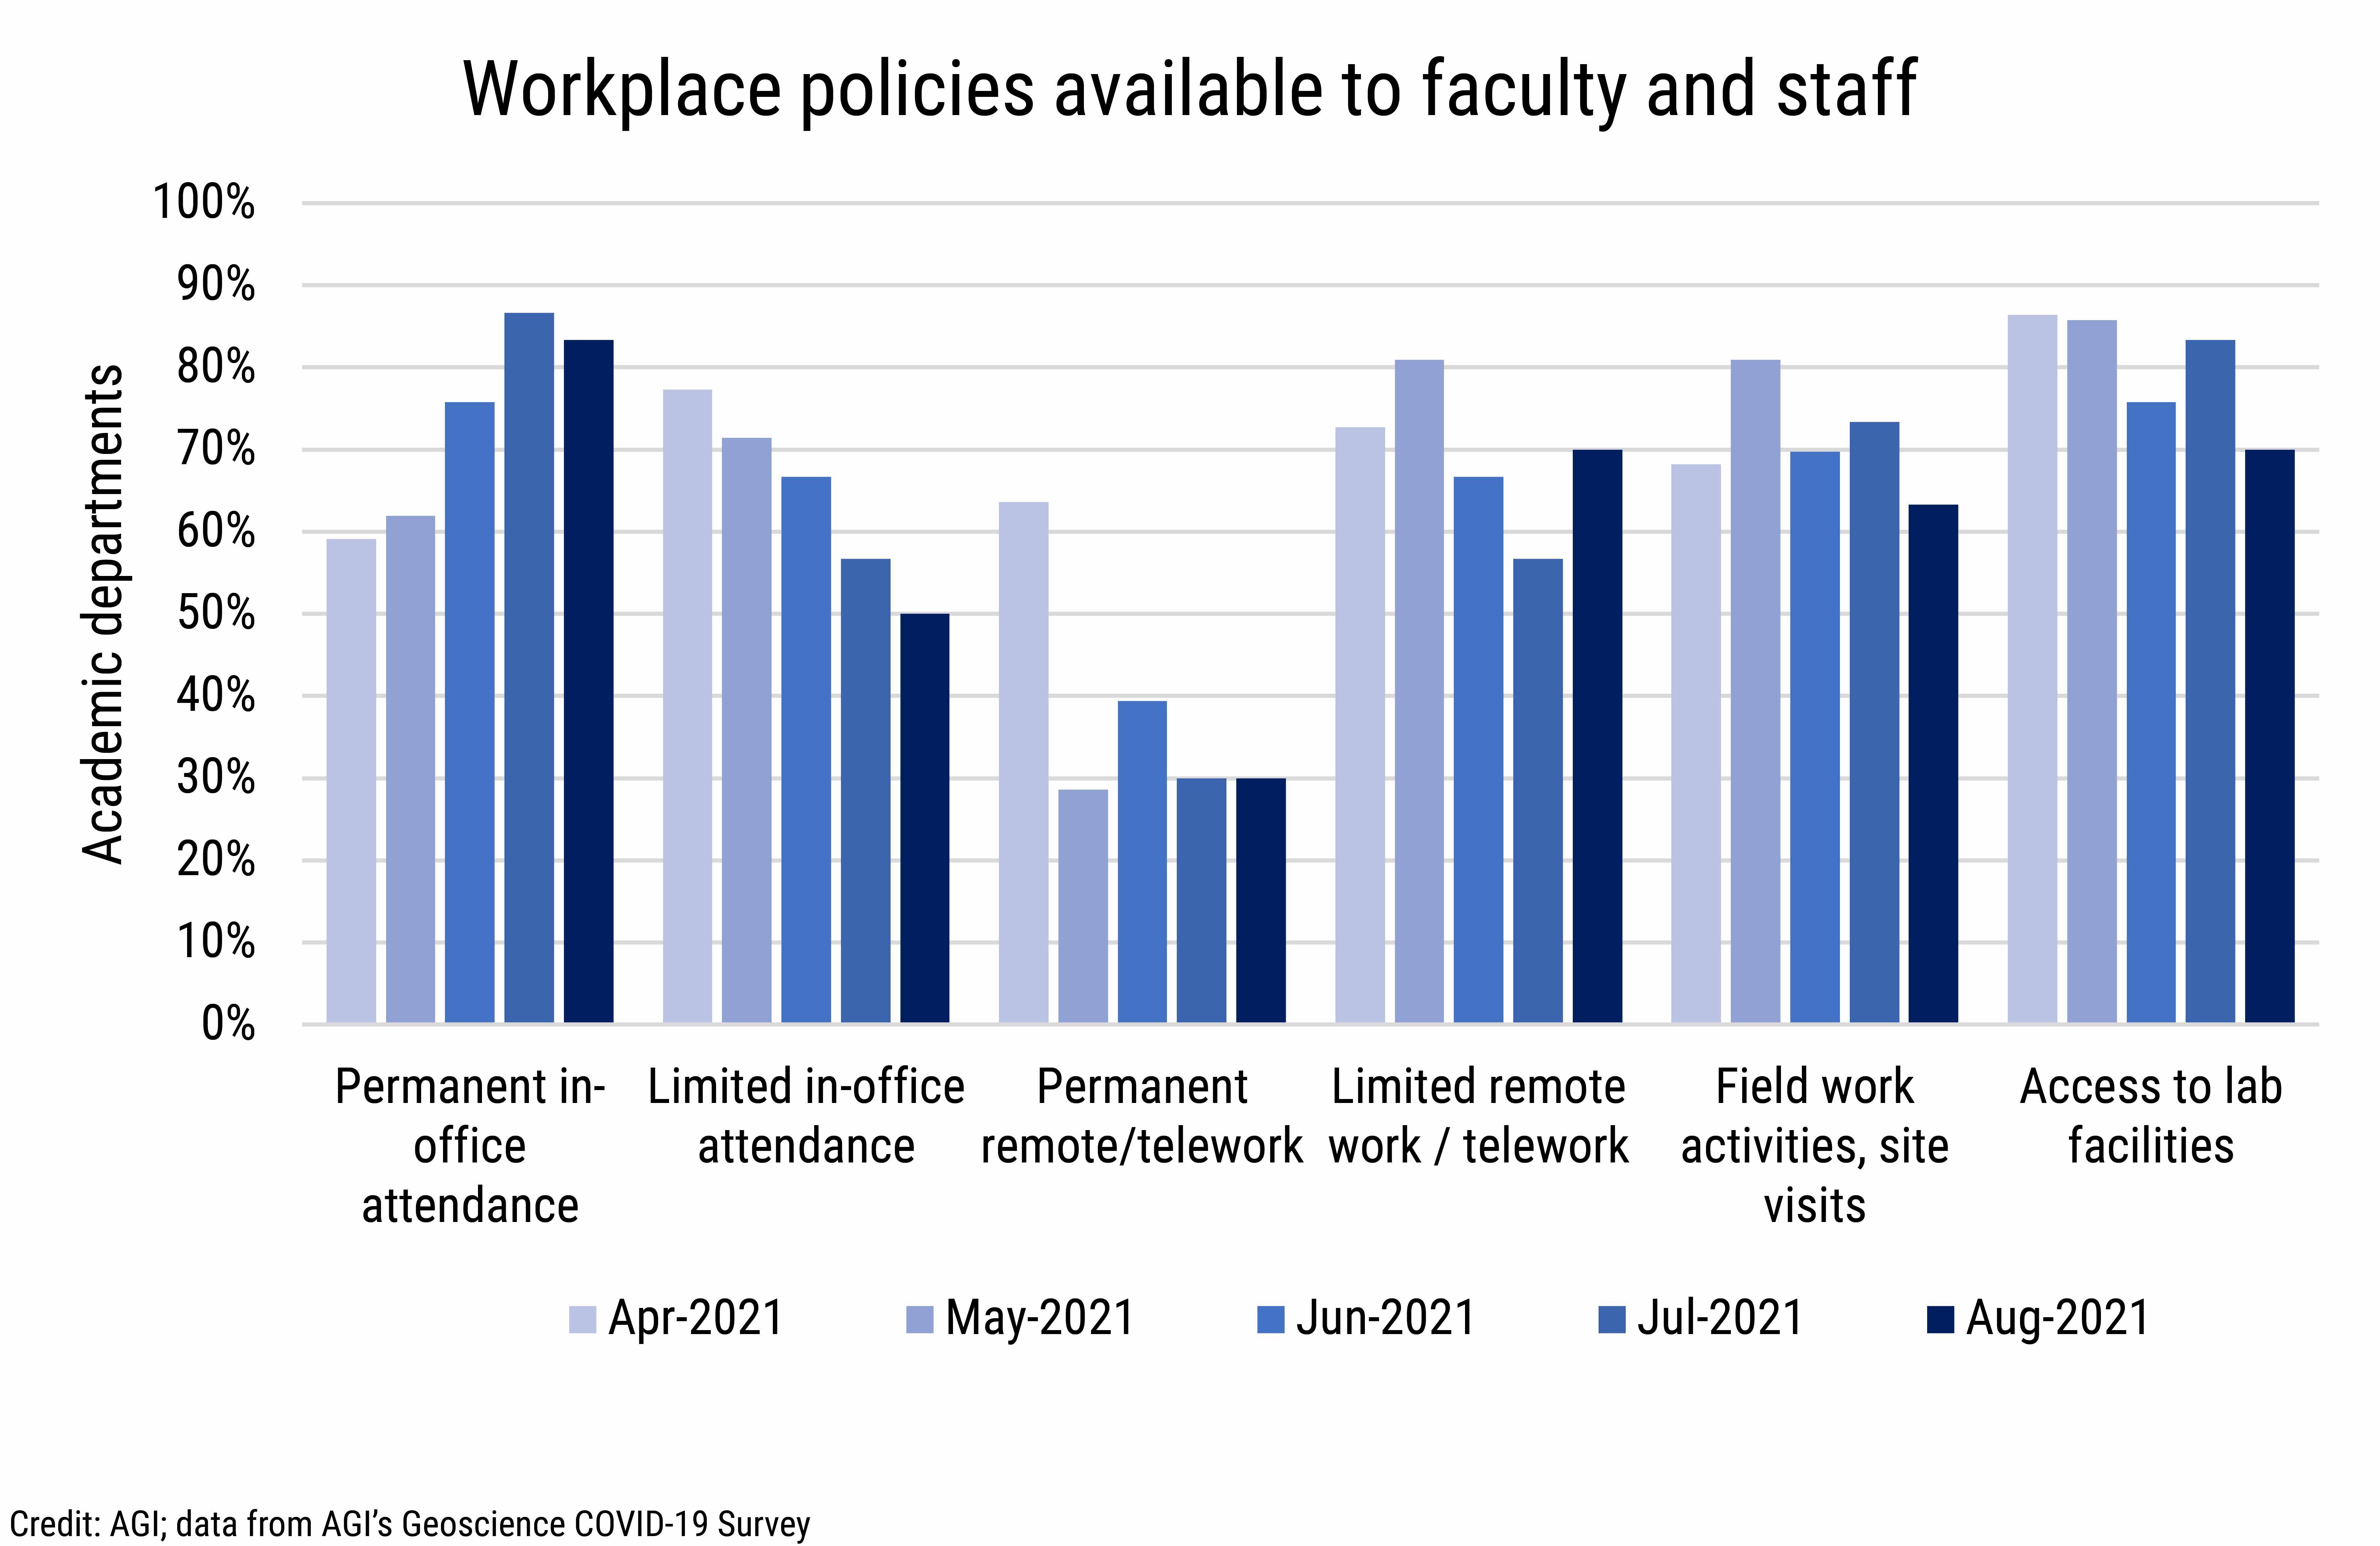 DB_2021-028 chart 04: Workplace policies available to faculty and staff (Credit: AGI; data from AGI's Geoscience COVID-19 Survey)